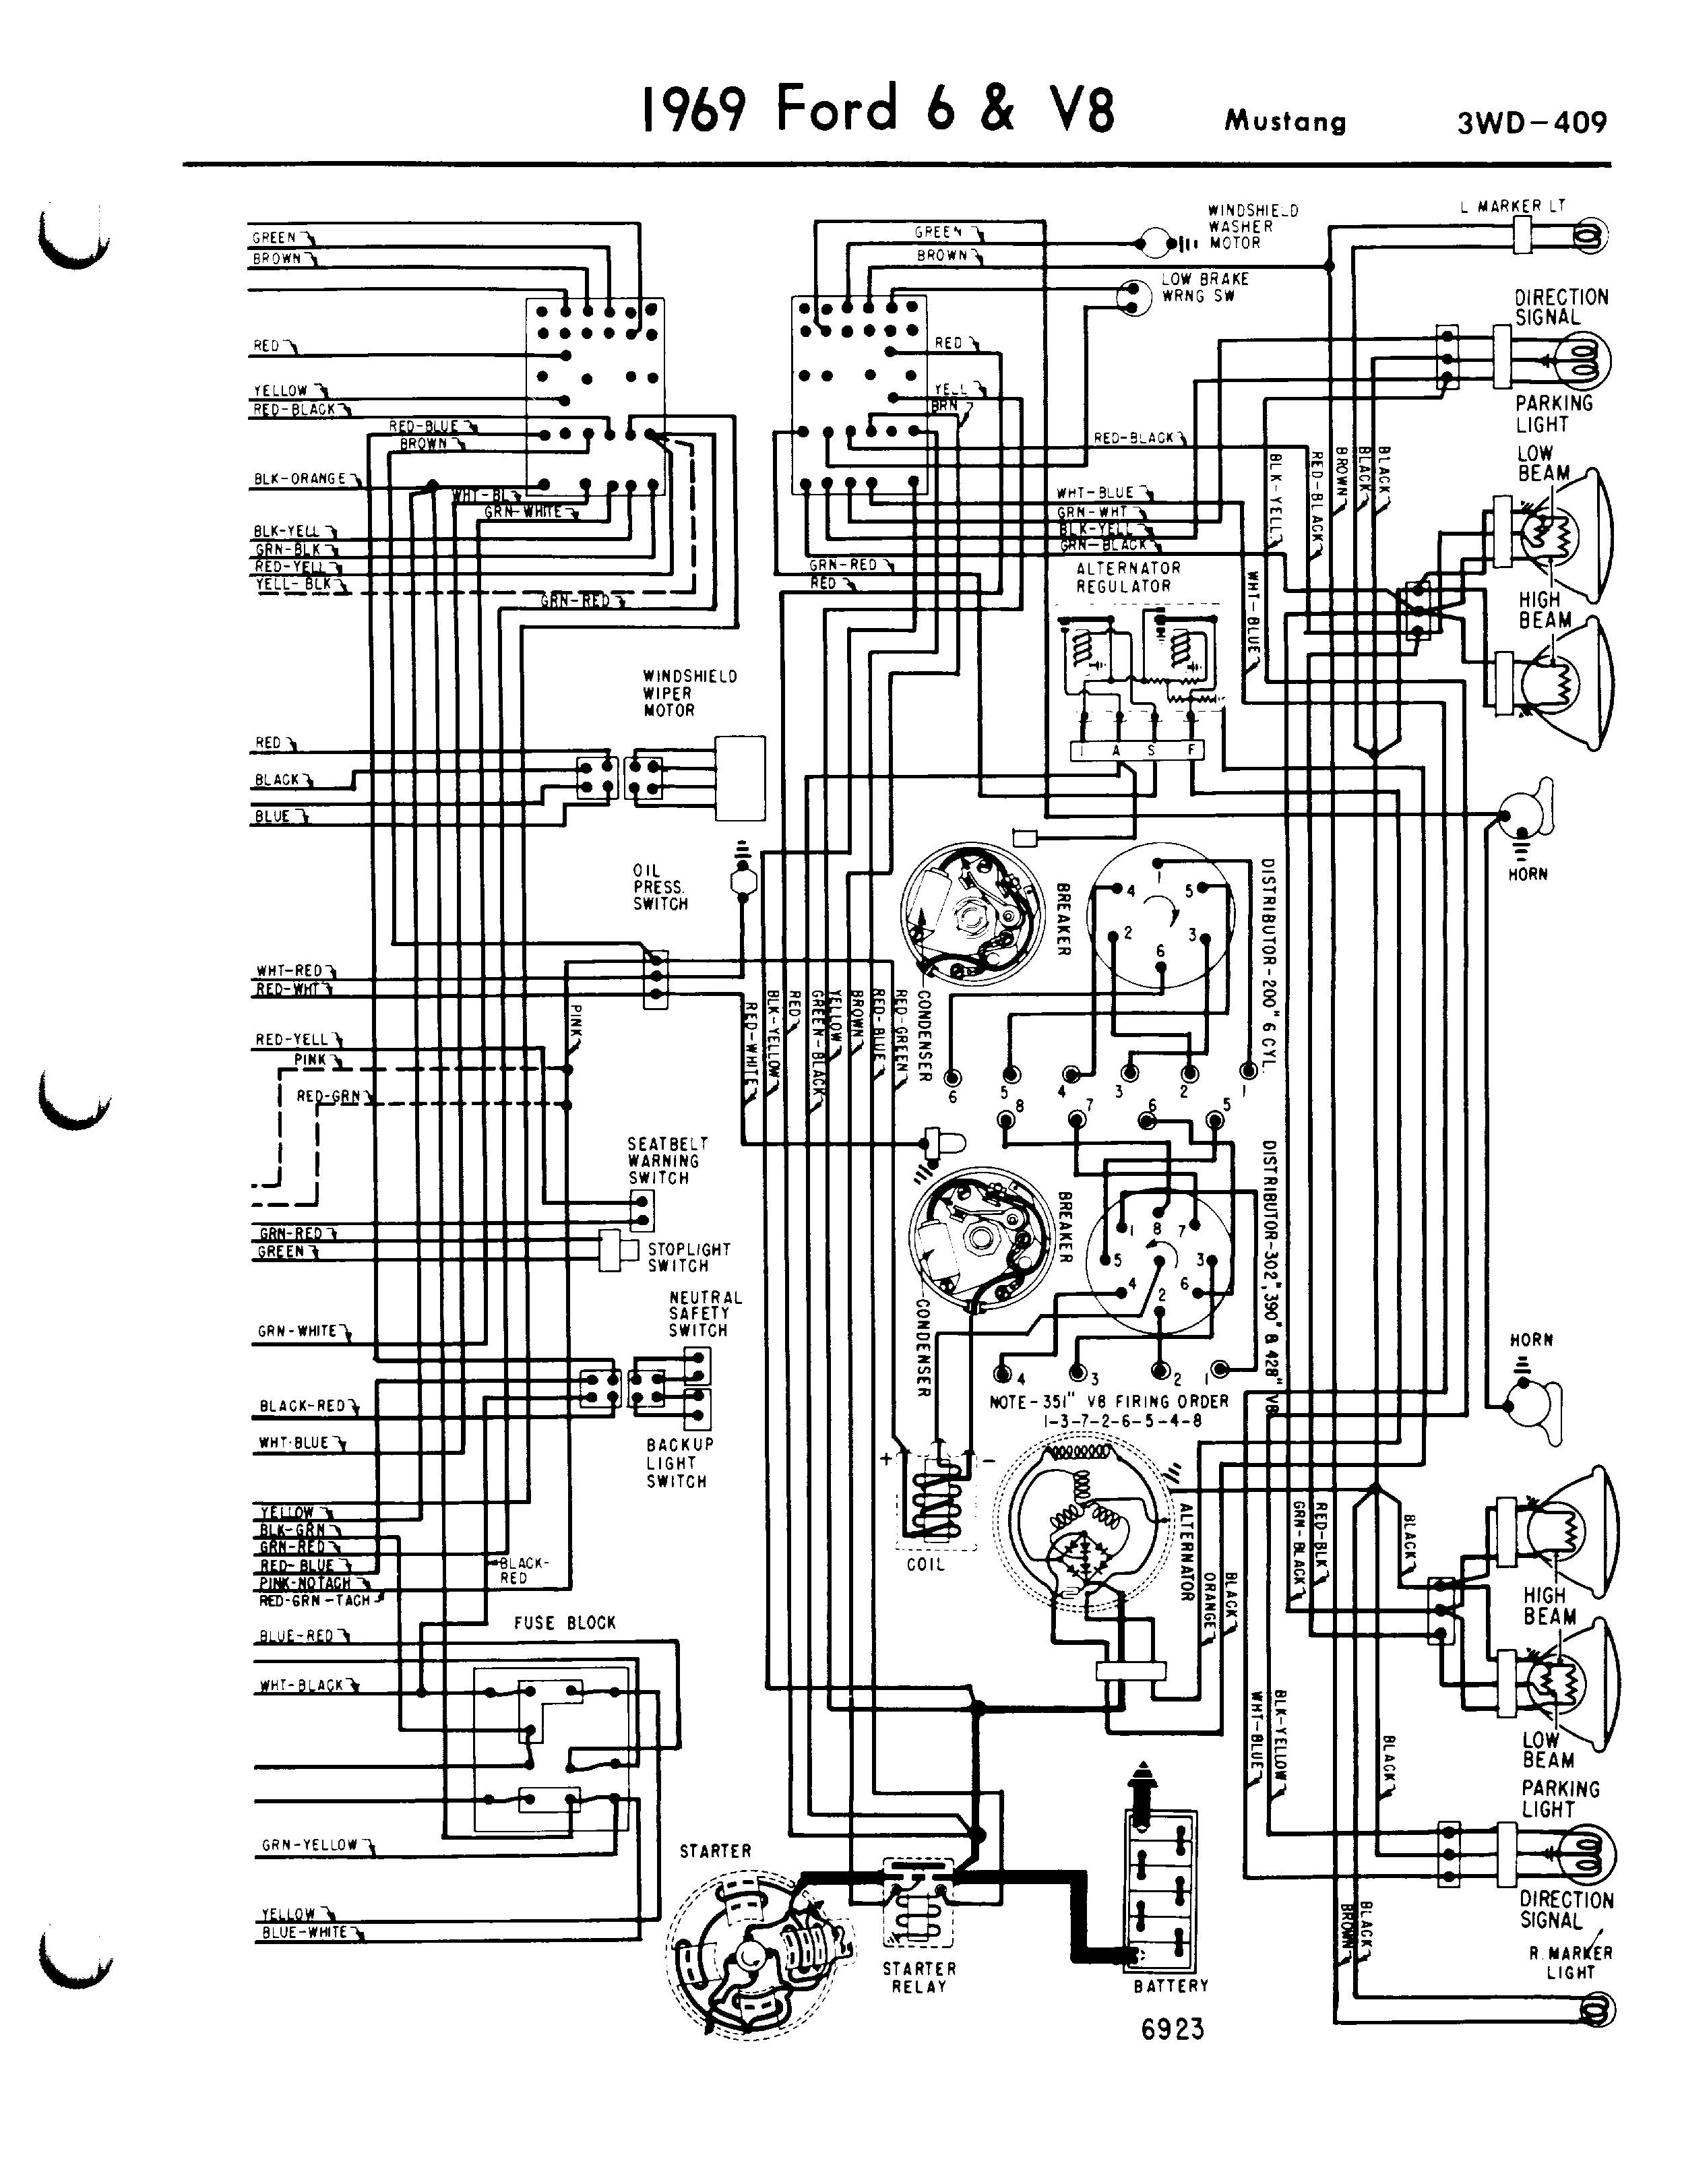 2003 ford Mustang Engine Diagram ford Diagrams with Mustang Wiring Diagram Blurts Of 2003 ford Mustang Engine Diagram